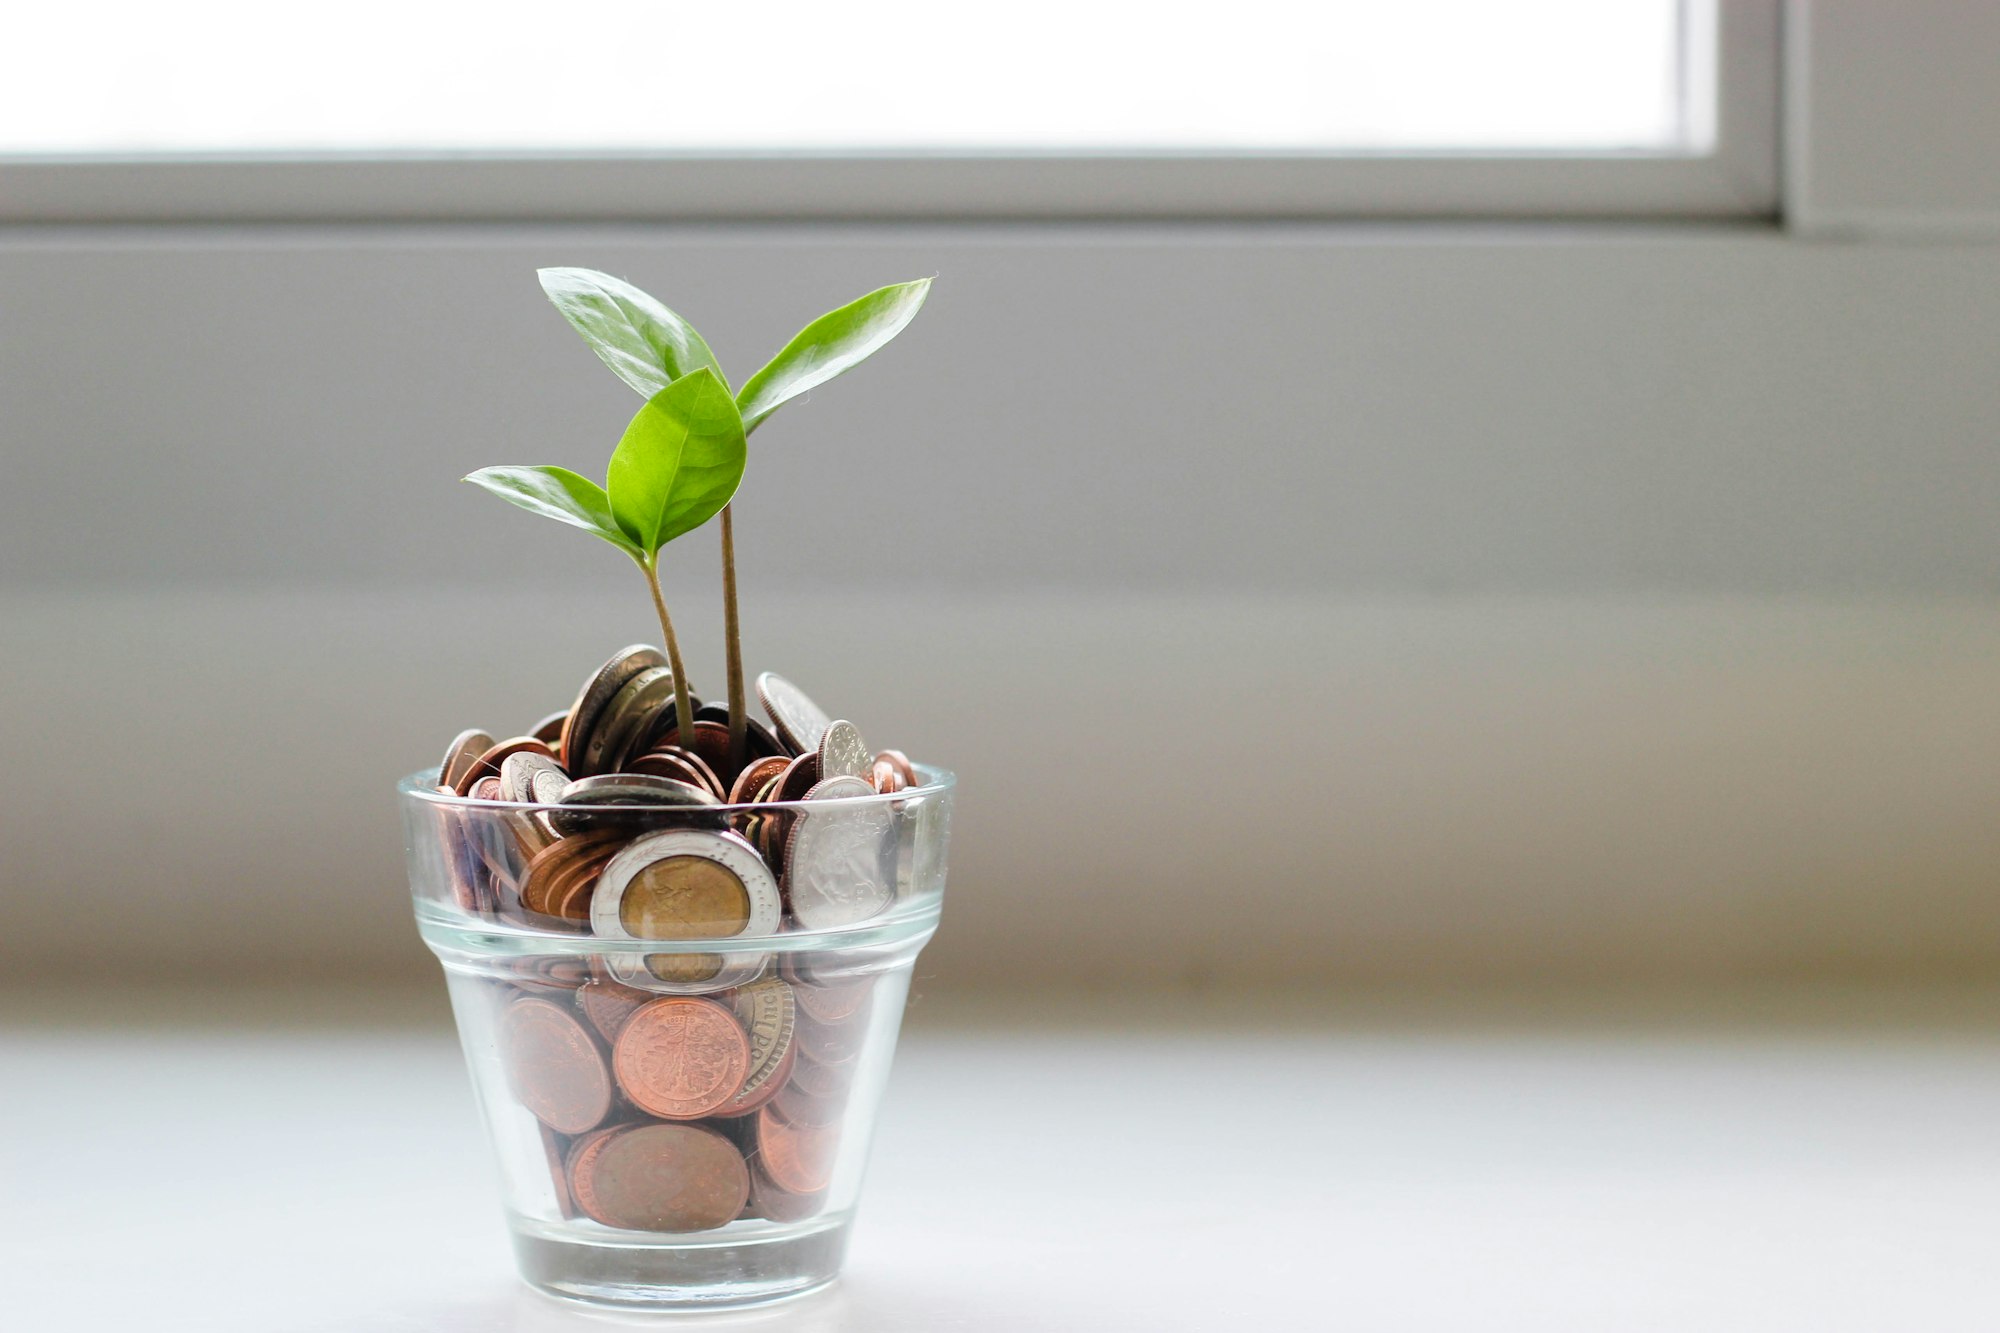 Plant shoots sprouting out from pot of coins